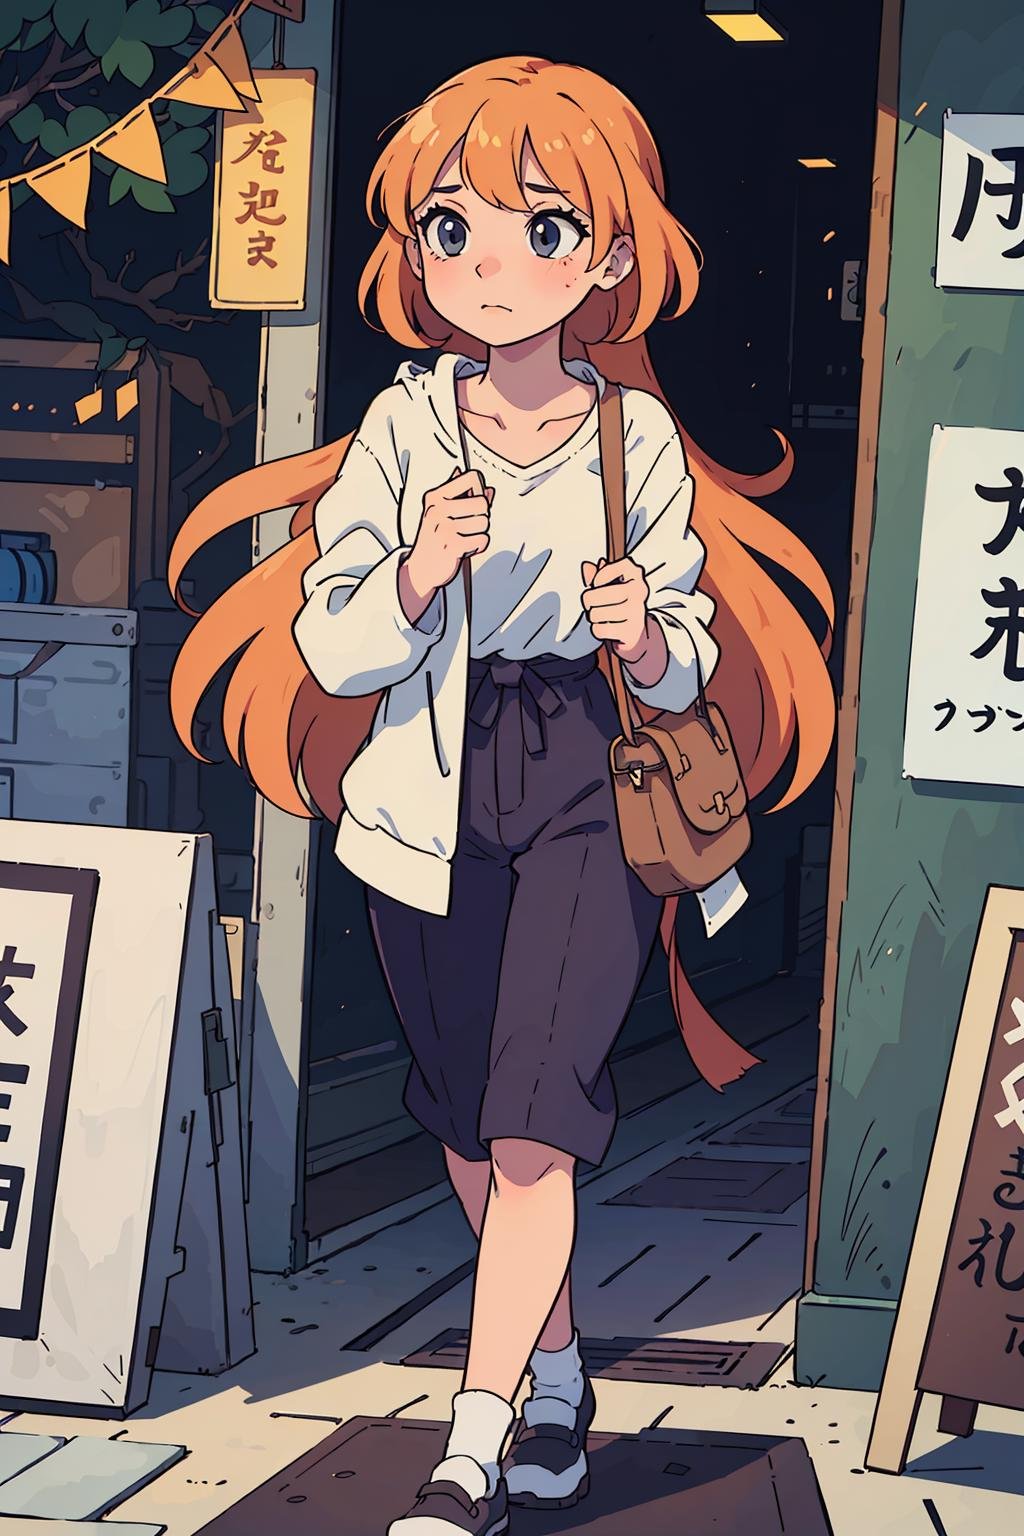 (best quality:0.8) perfect anime illustration, a pretty woman walking around in Tokyo